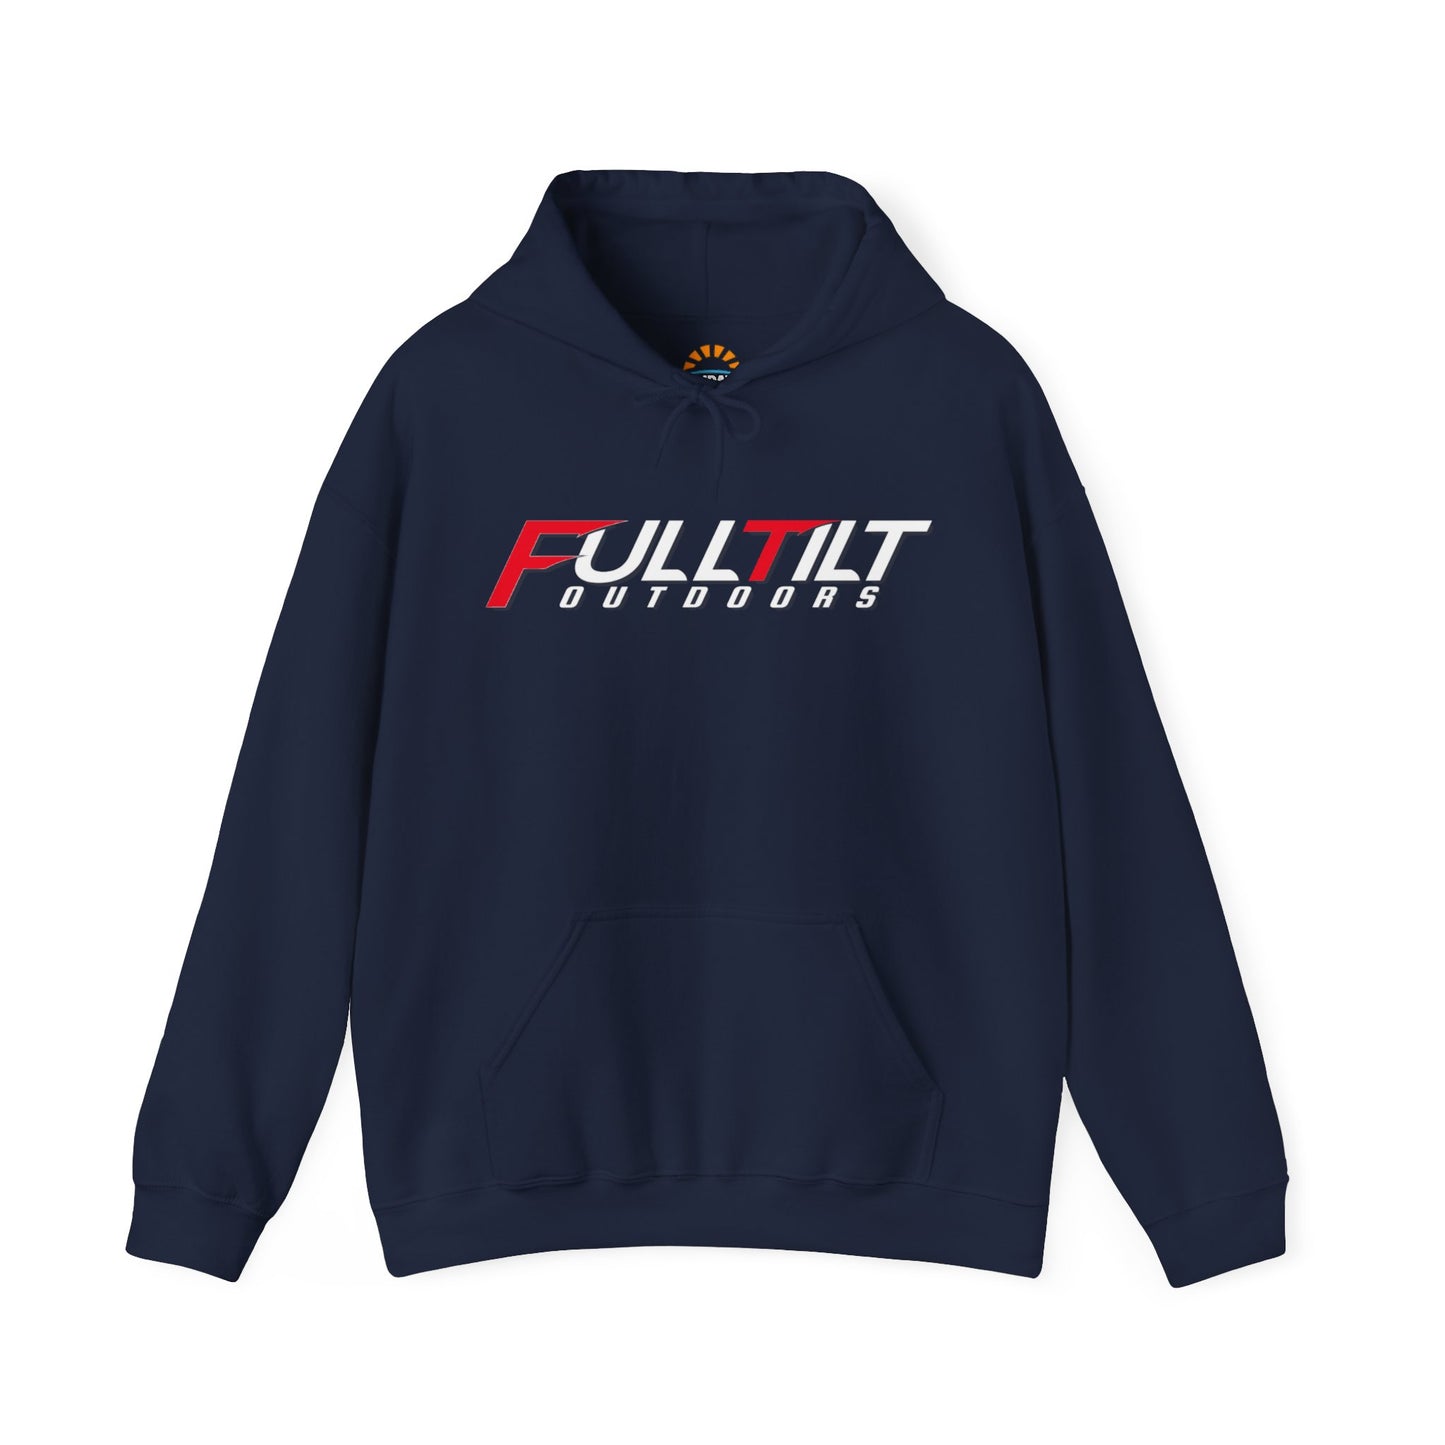 Full Tilt Outdoors - Angry Eagle - Cotton/Poly Blend Hoodie (Dark Colors)